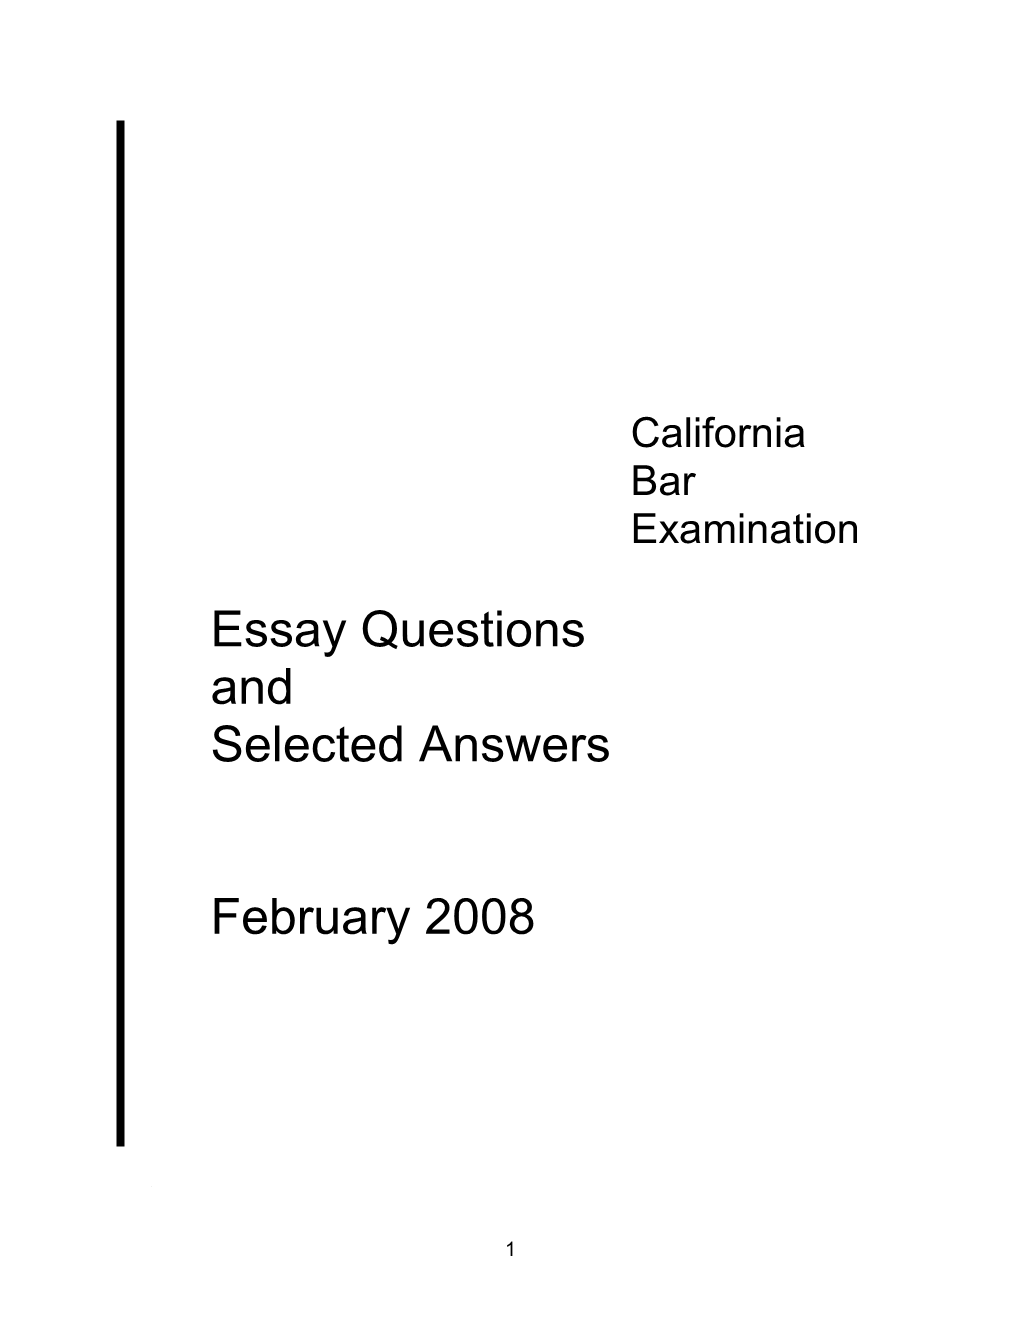 Essay Questions and Selected Answers February 2008 California Bar Examination